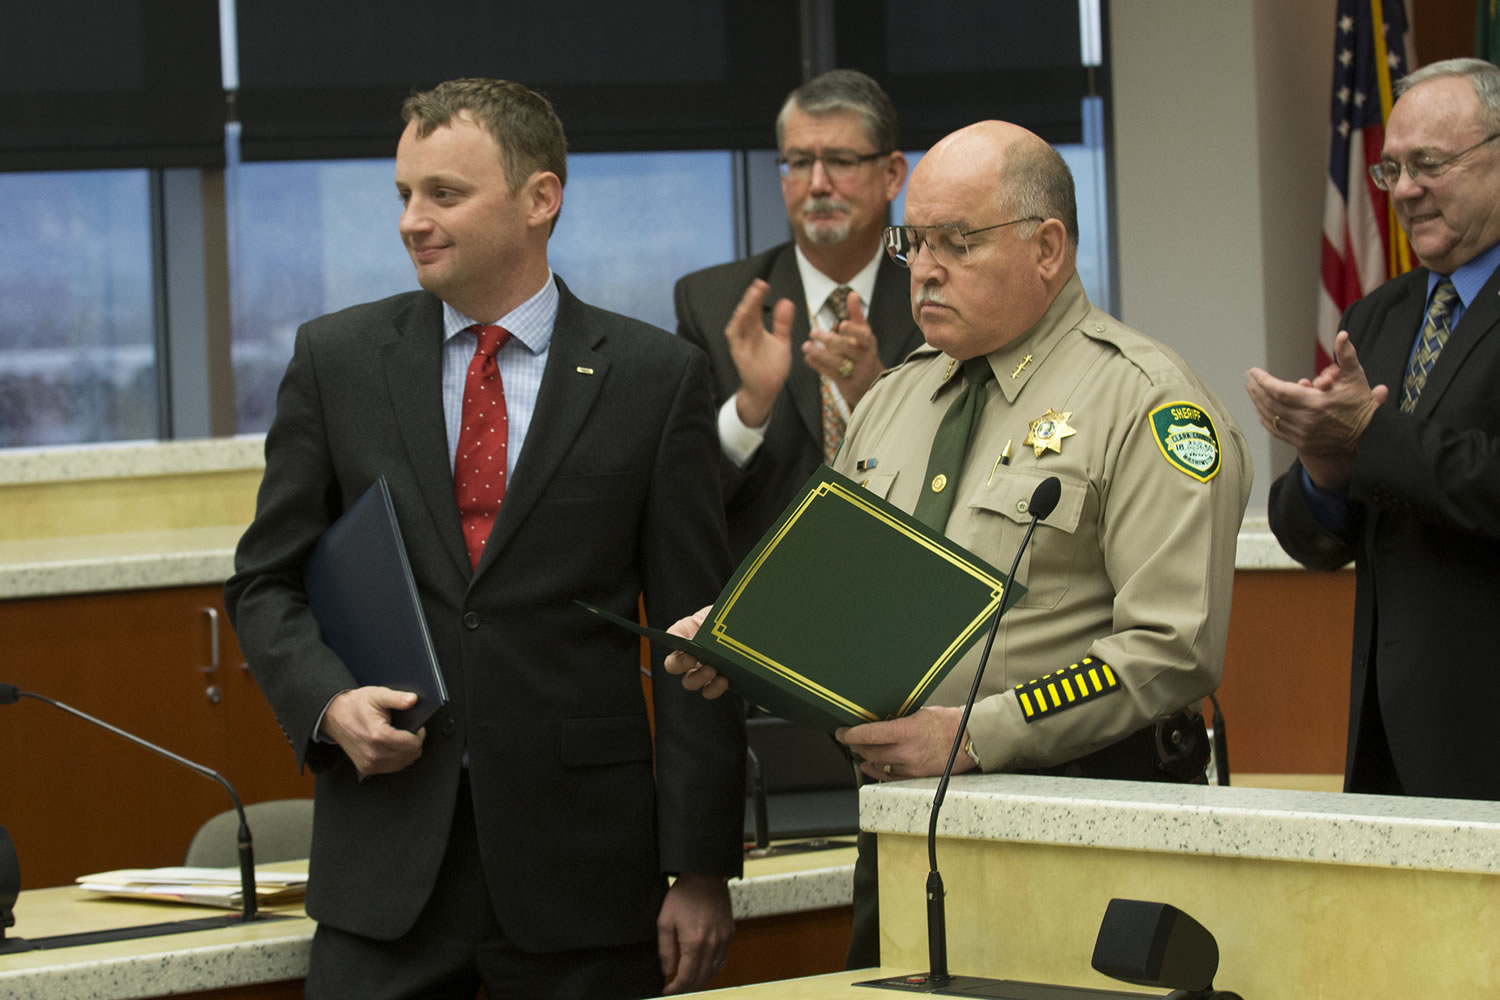 Neil Burkhardt, left, who tackled a shooter at the Vancouver Veterans Affairs center on Feb. 4, 2014, receives the county&#039;s Citizen Service medal from then-Sheriff Garry Lucas on Dec. 9, 2014.